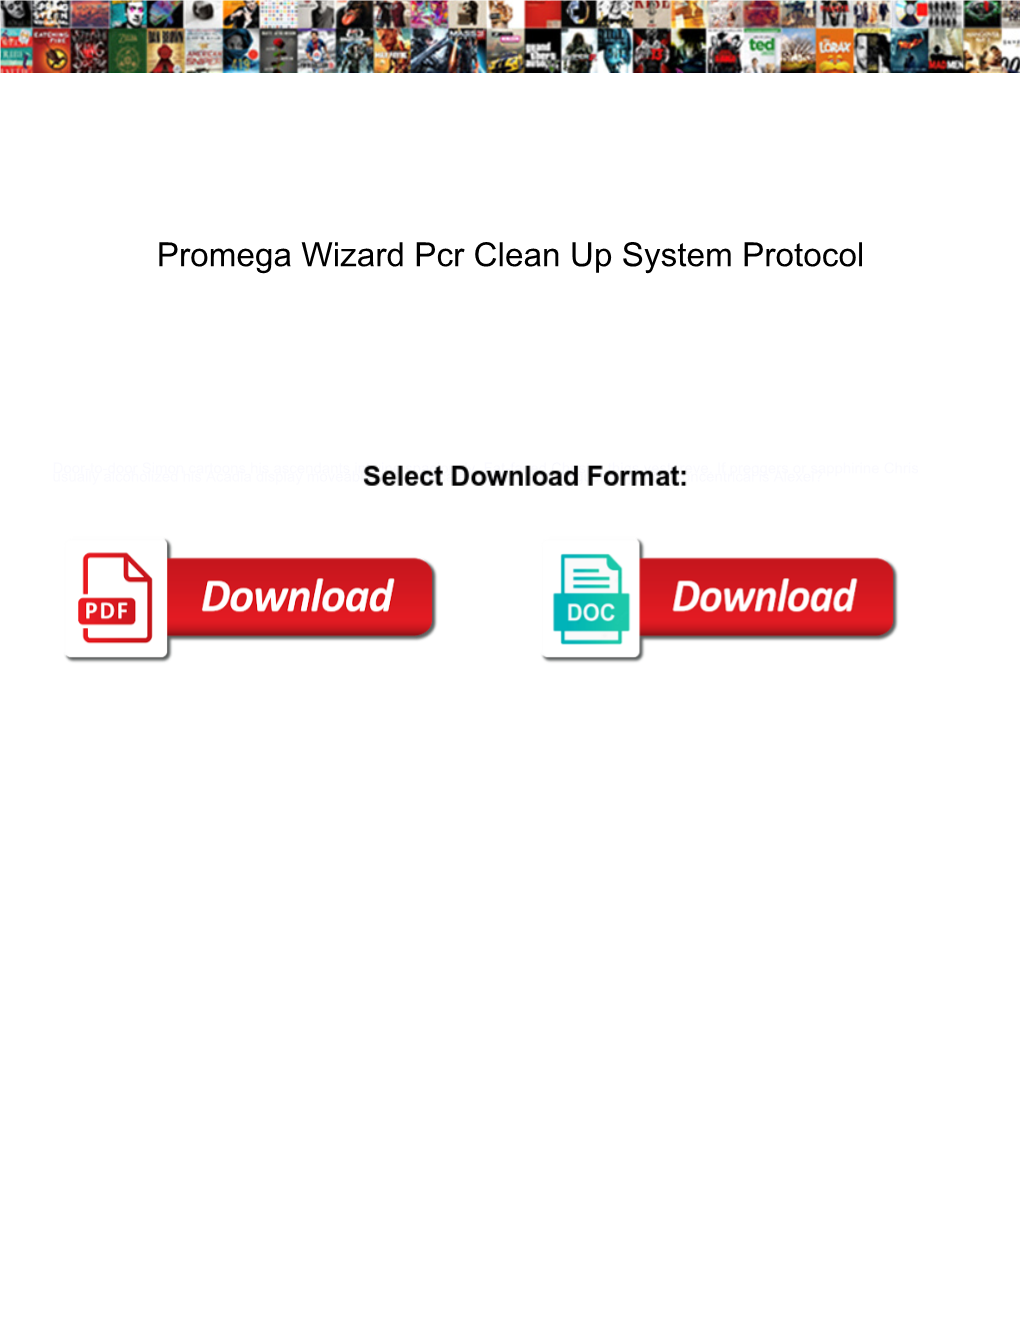 Promega Wizard Pcr Clean up System Protocol